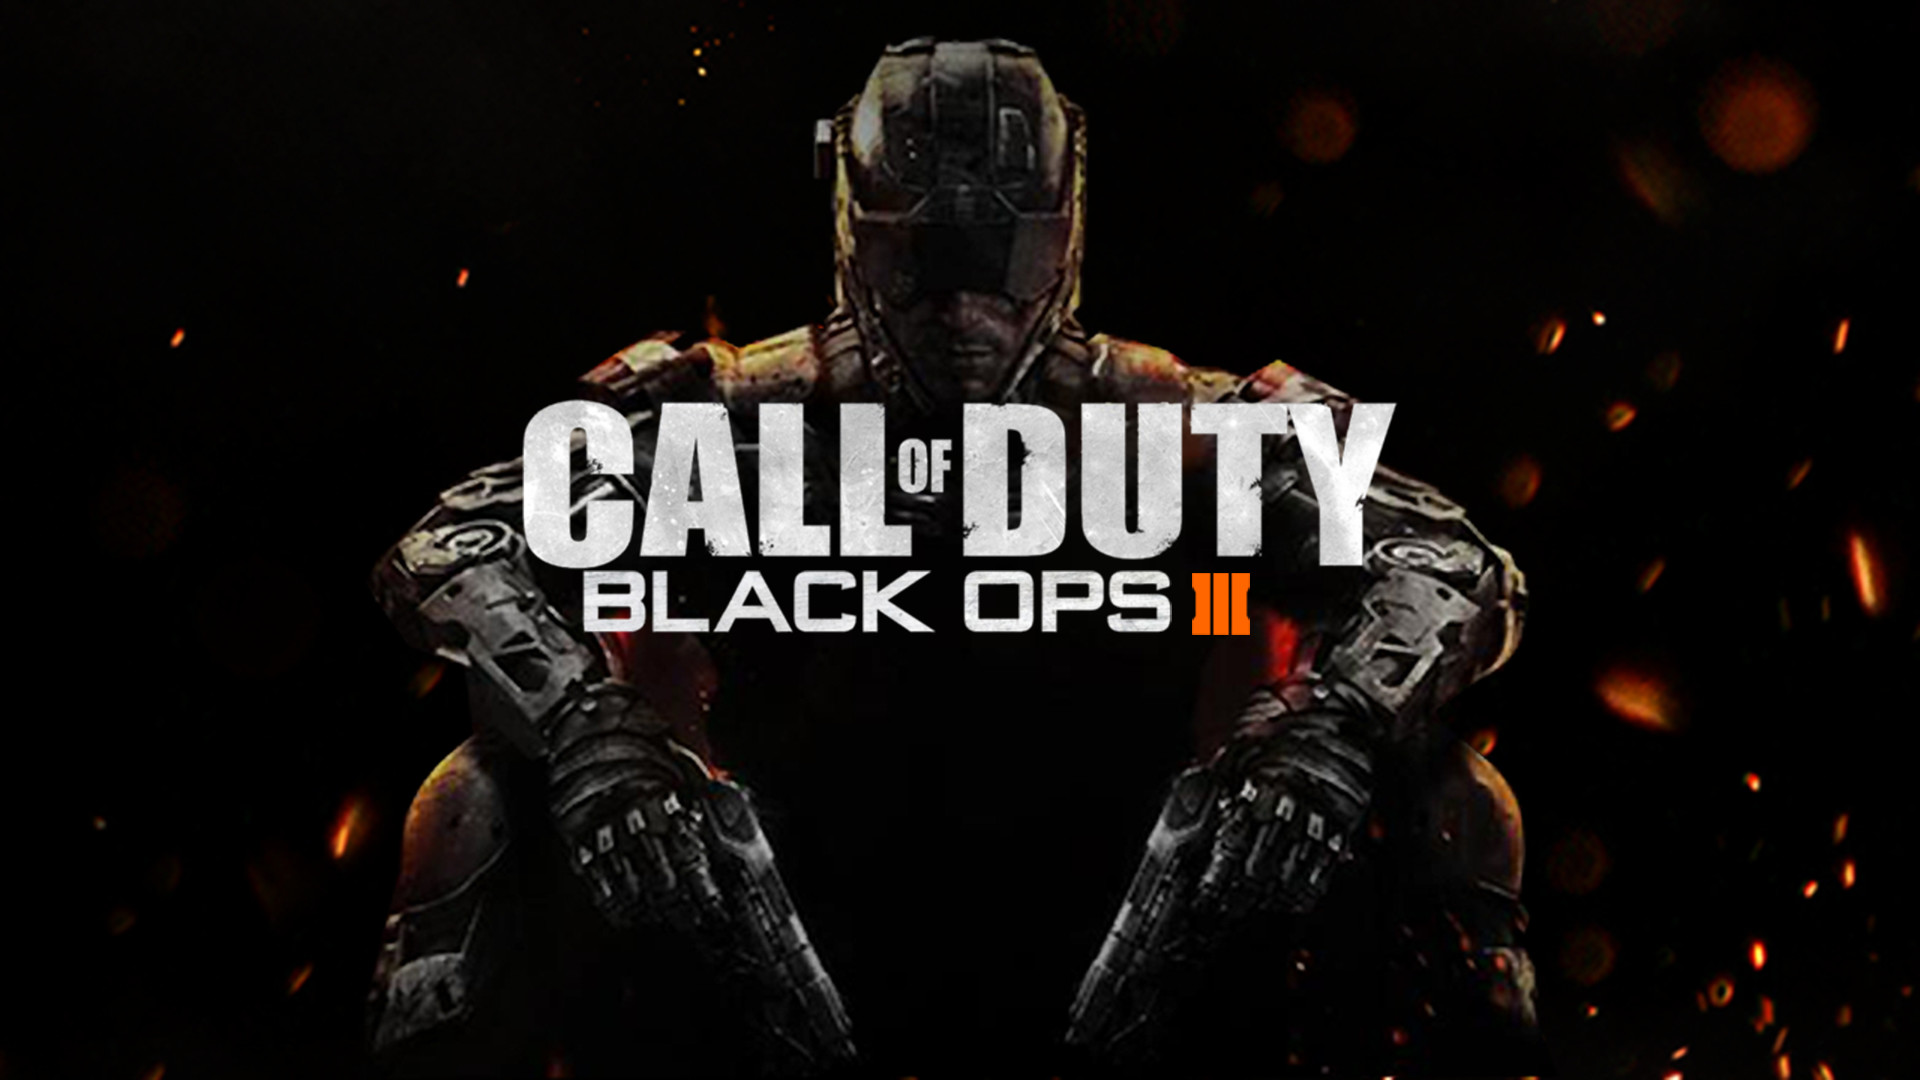 Call of Duty Black Ops III Wallpapers (83+ pictures)